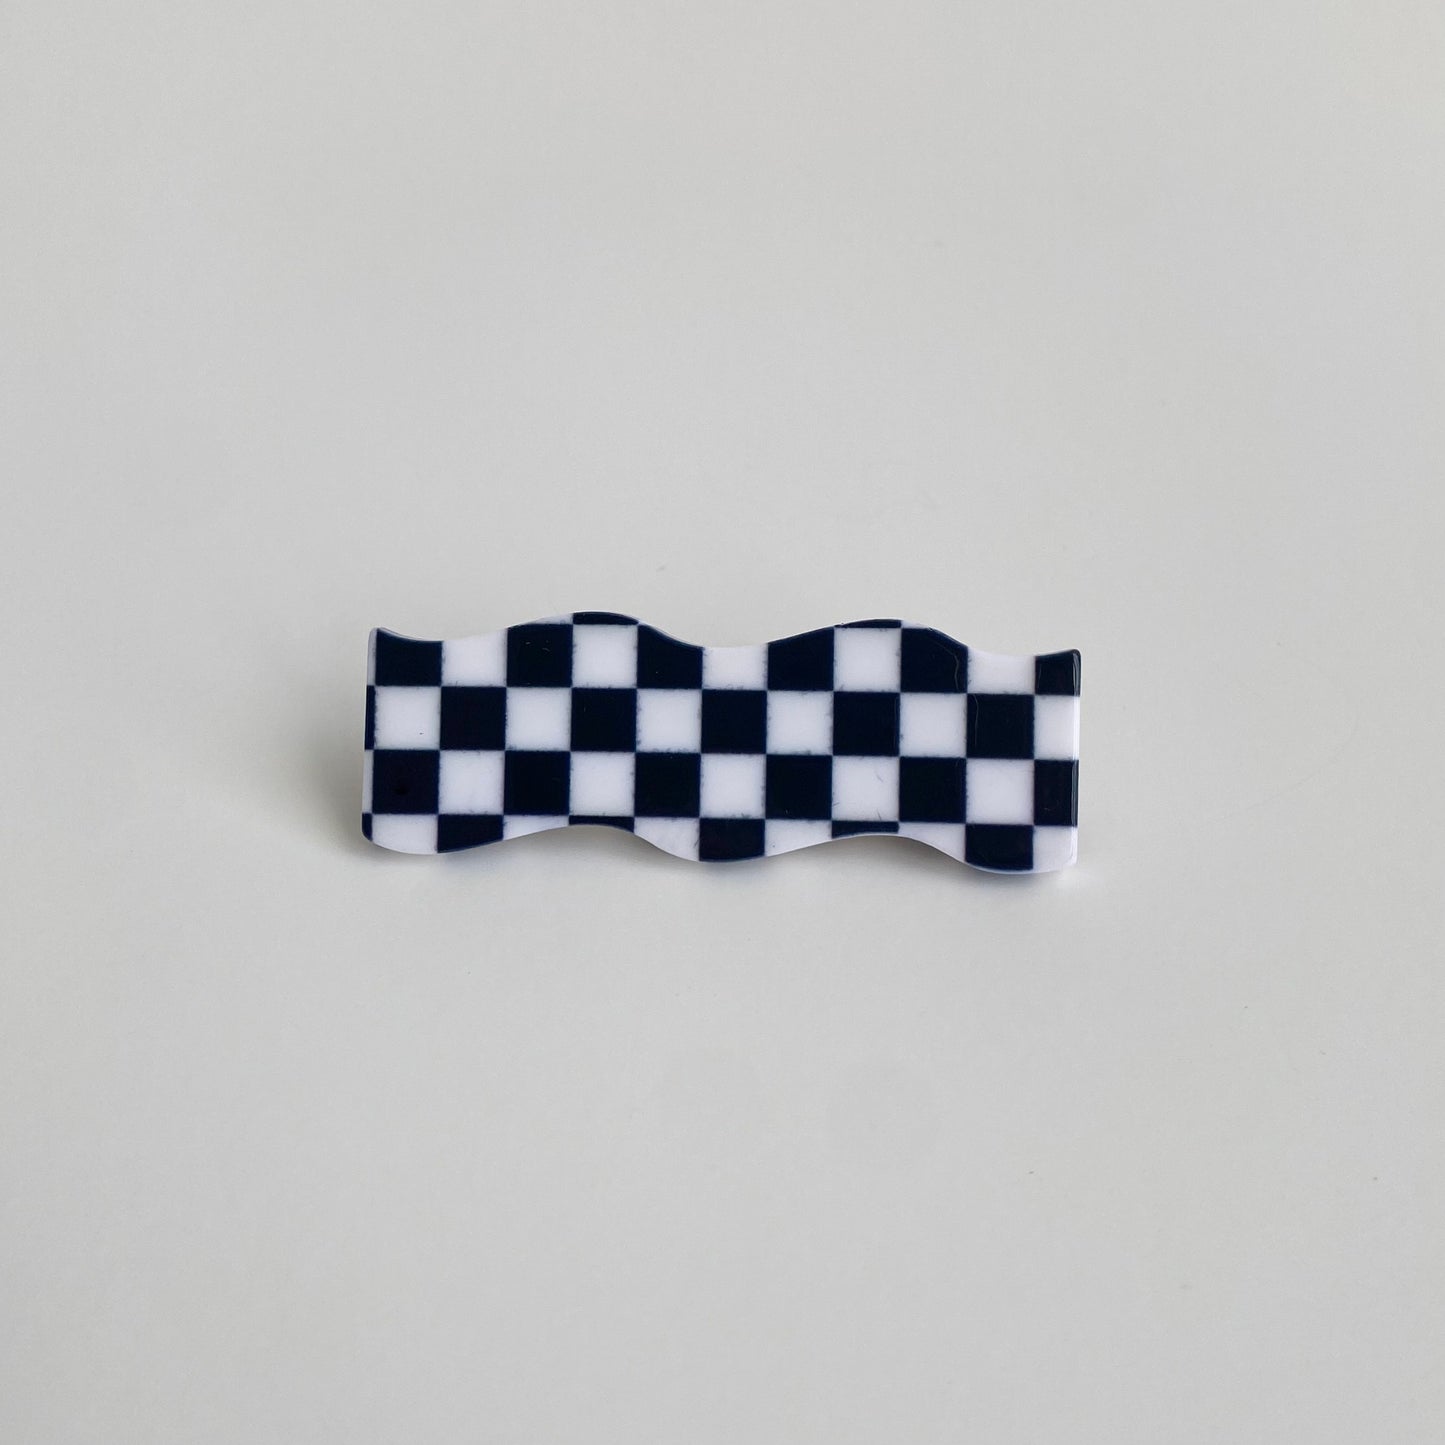 Checkered hairpin in black checkered wave